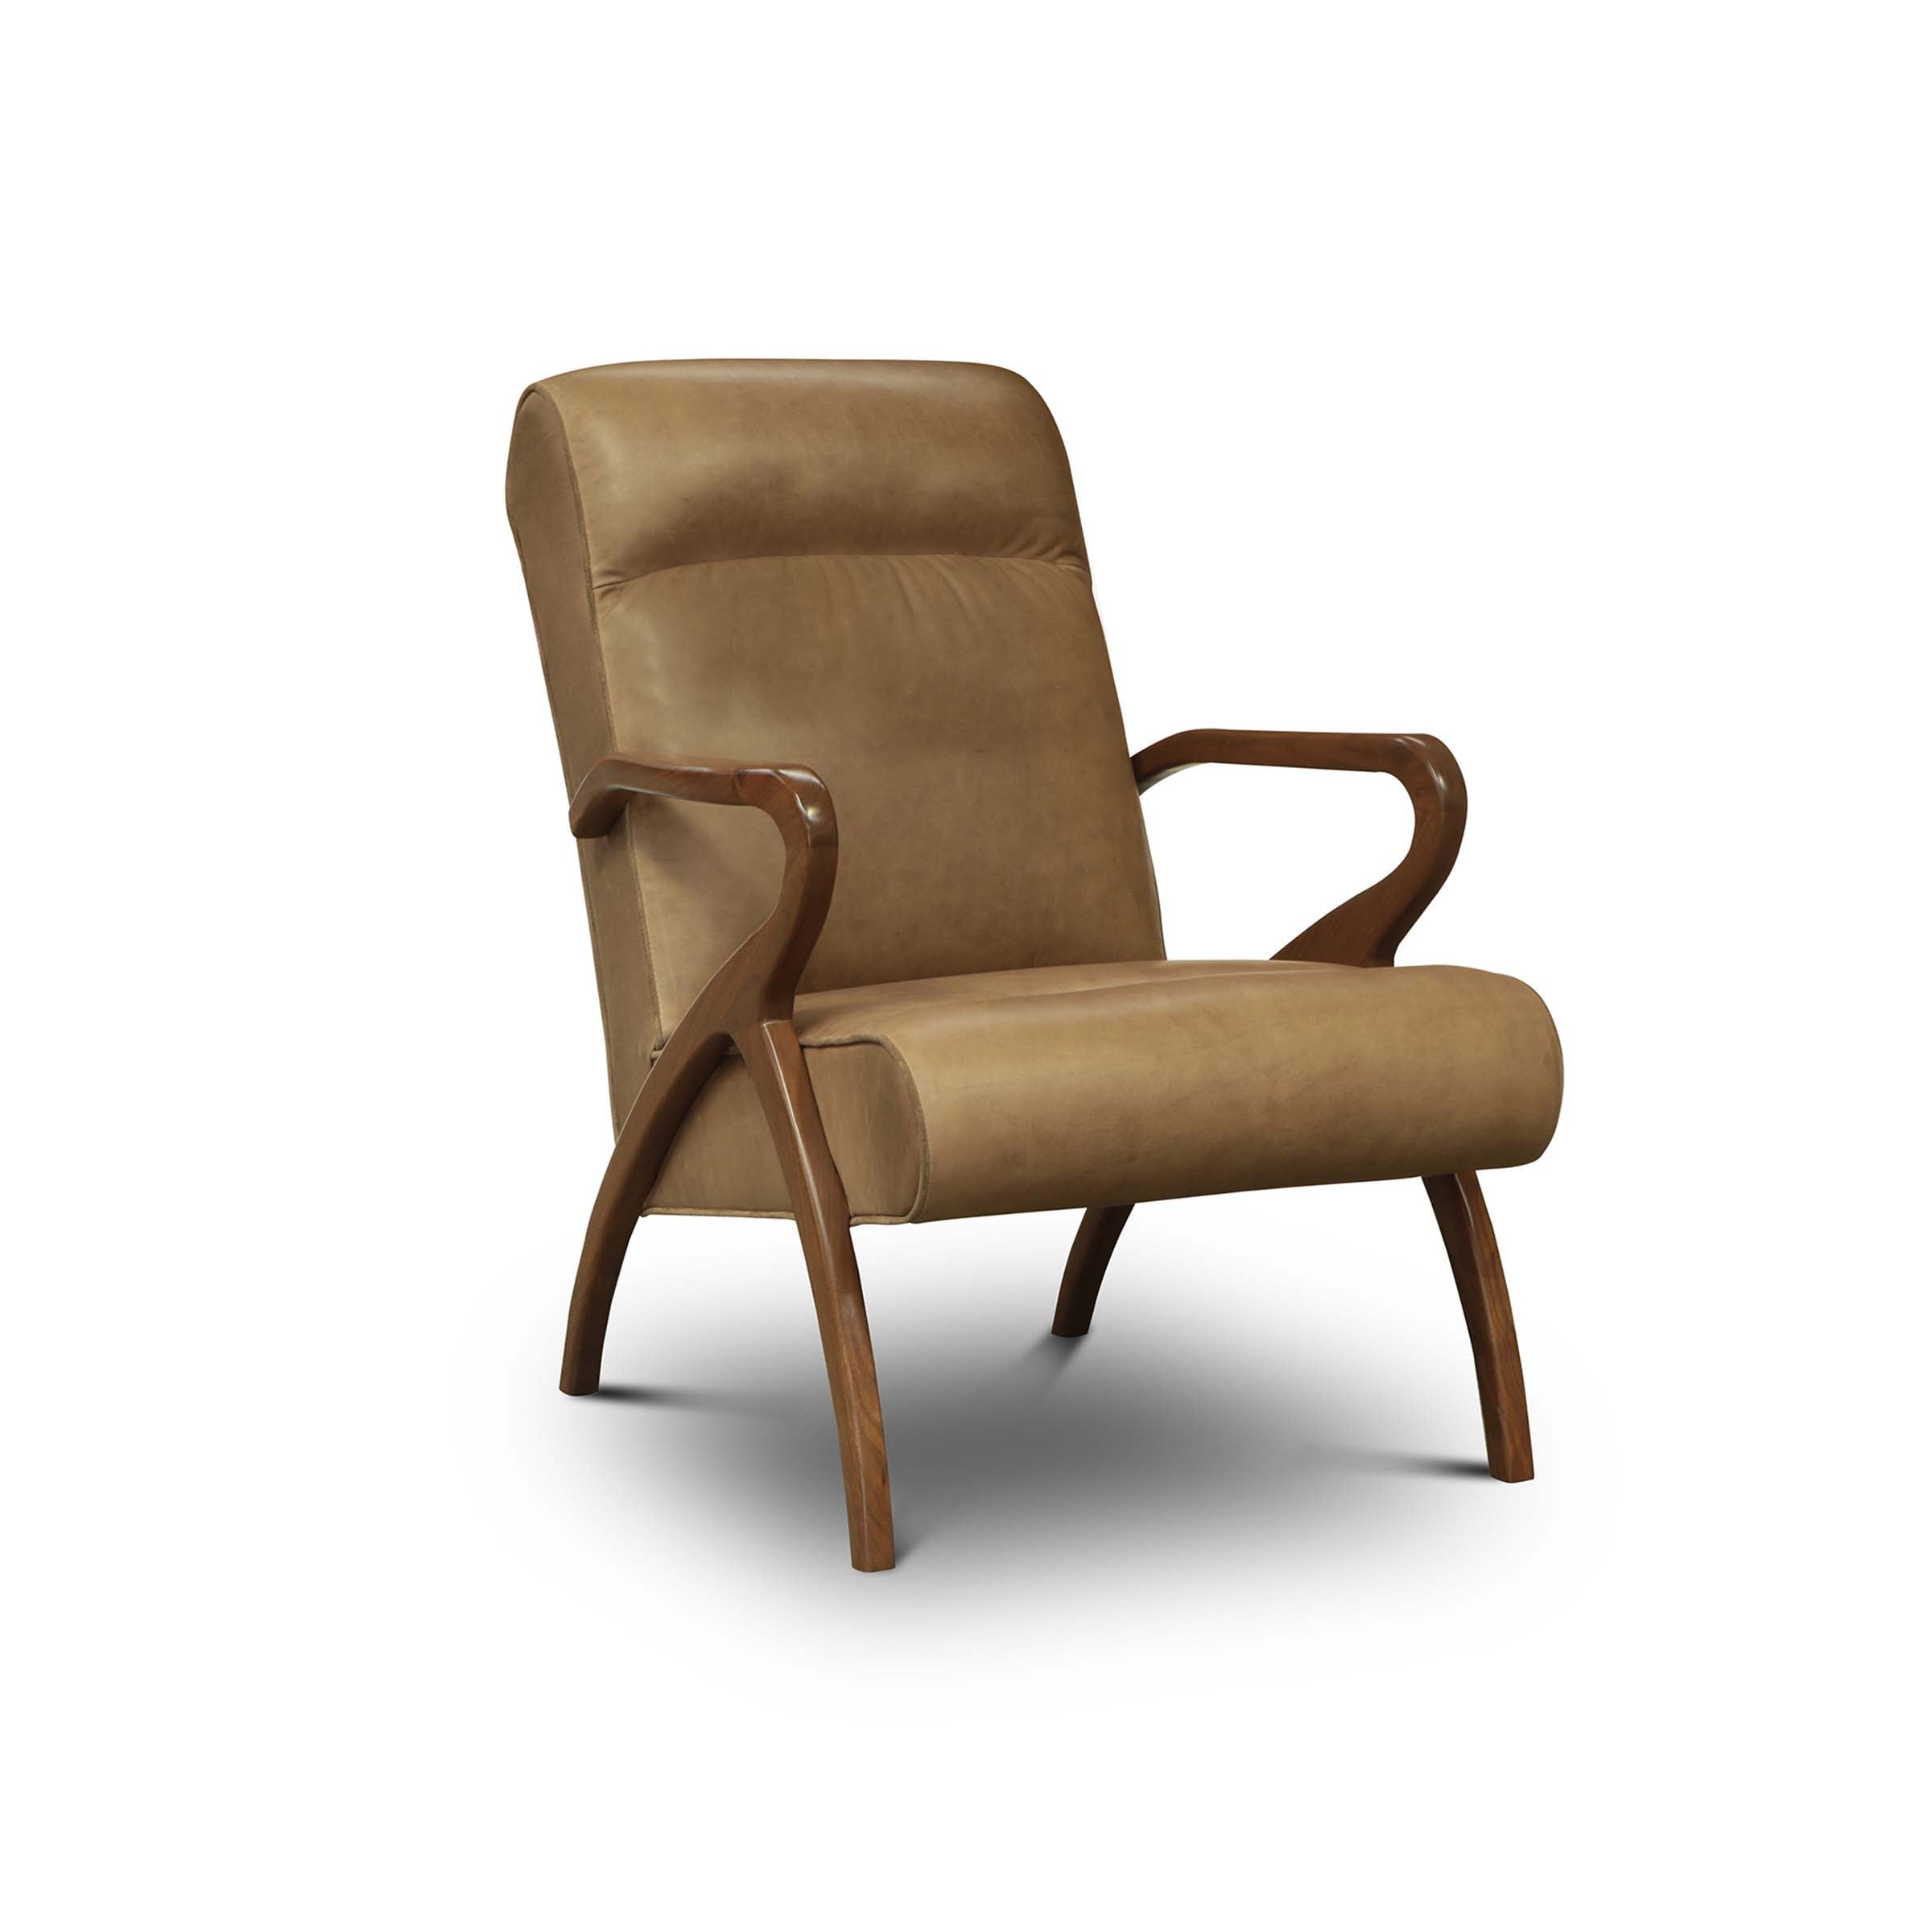 Eleanor Rigby Adele 1E Accent Chair